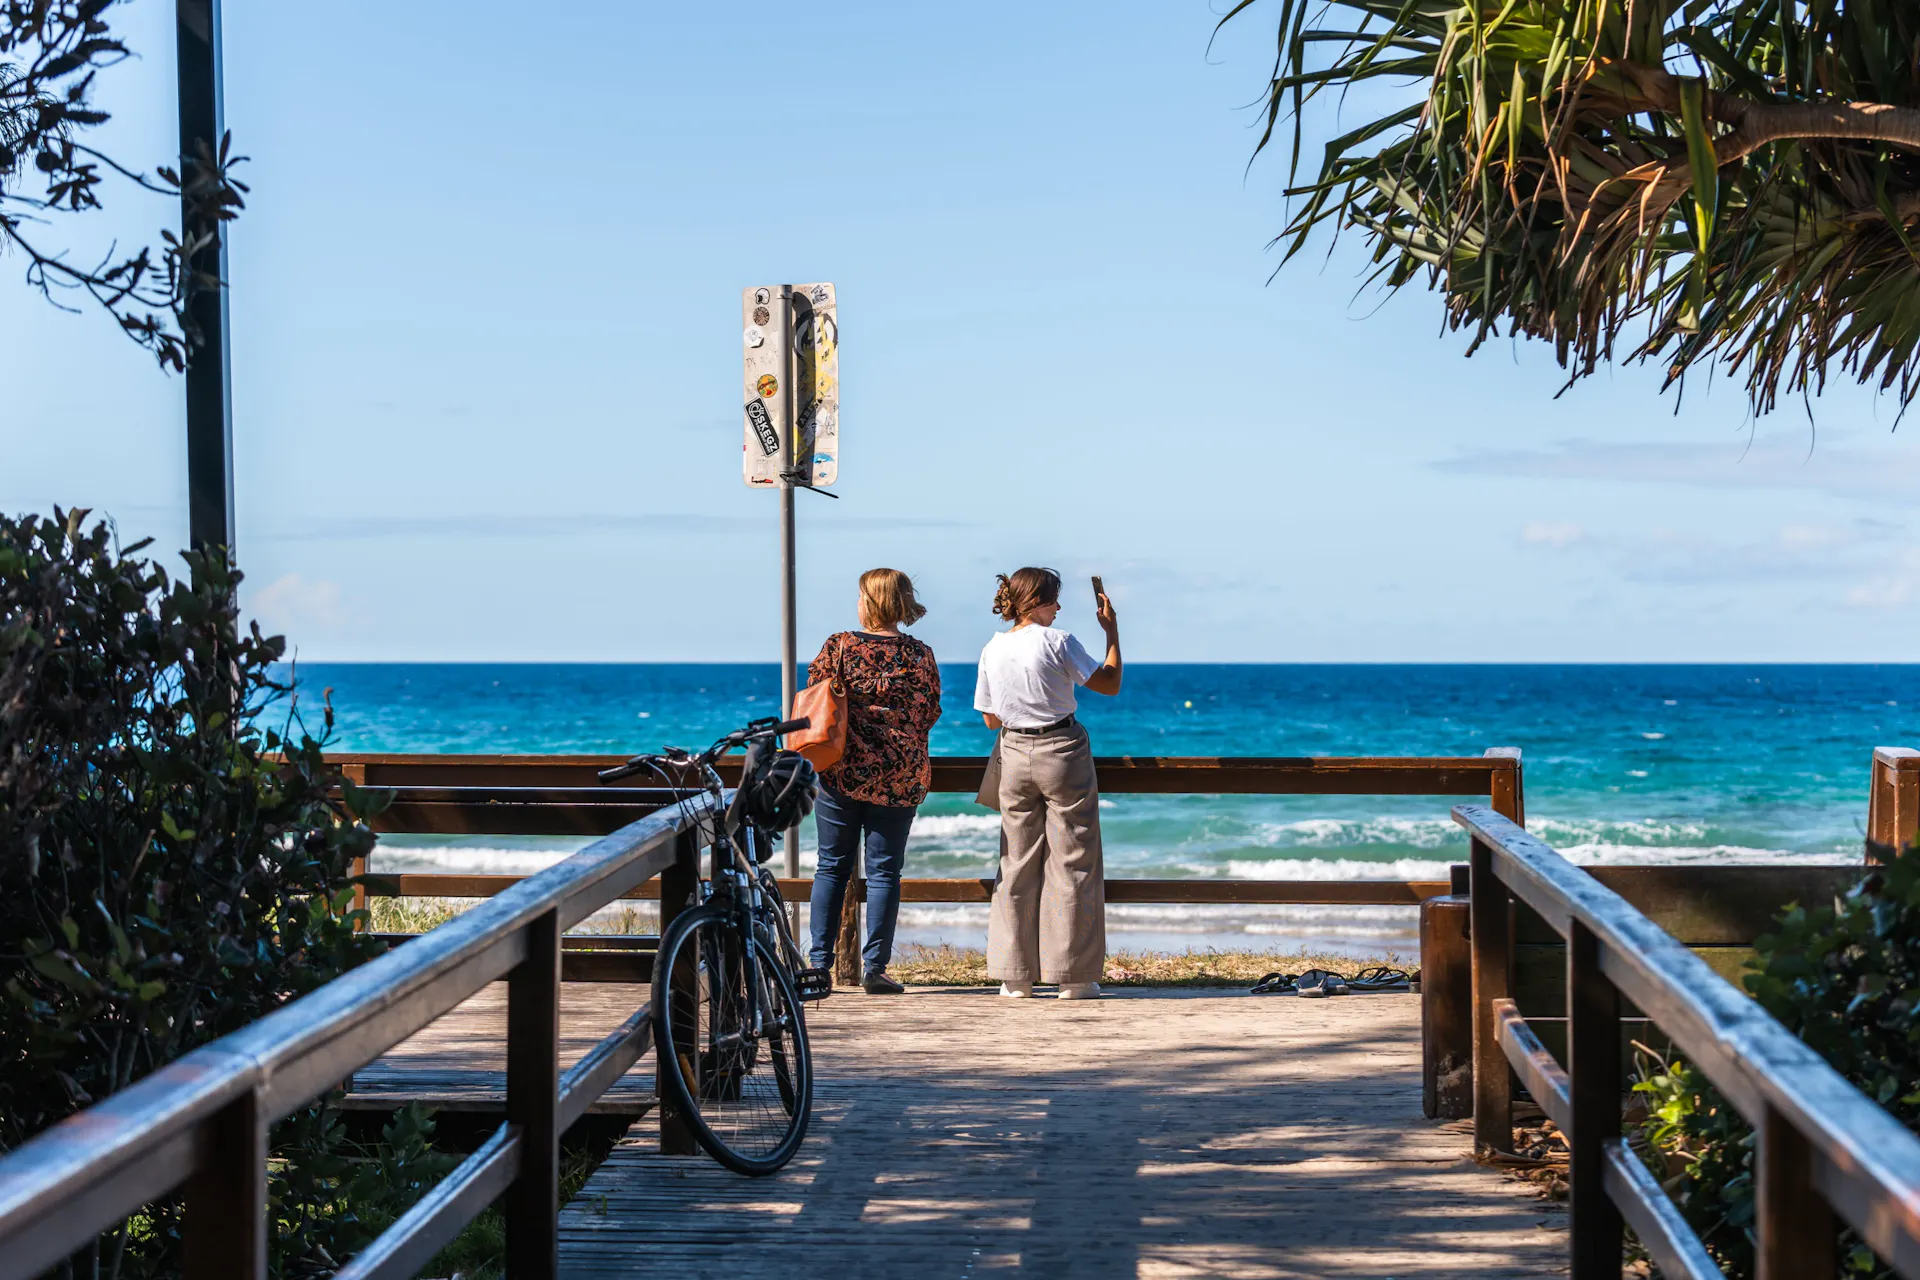 Shot of 2 women at the end of a small boardwalk with ocean in the background. Mudjimba Park entrance